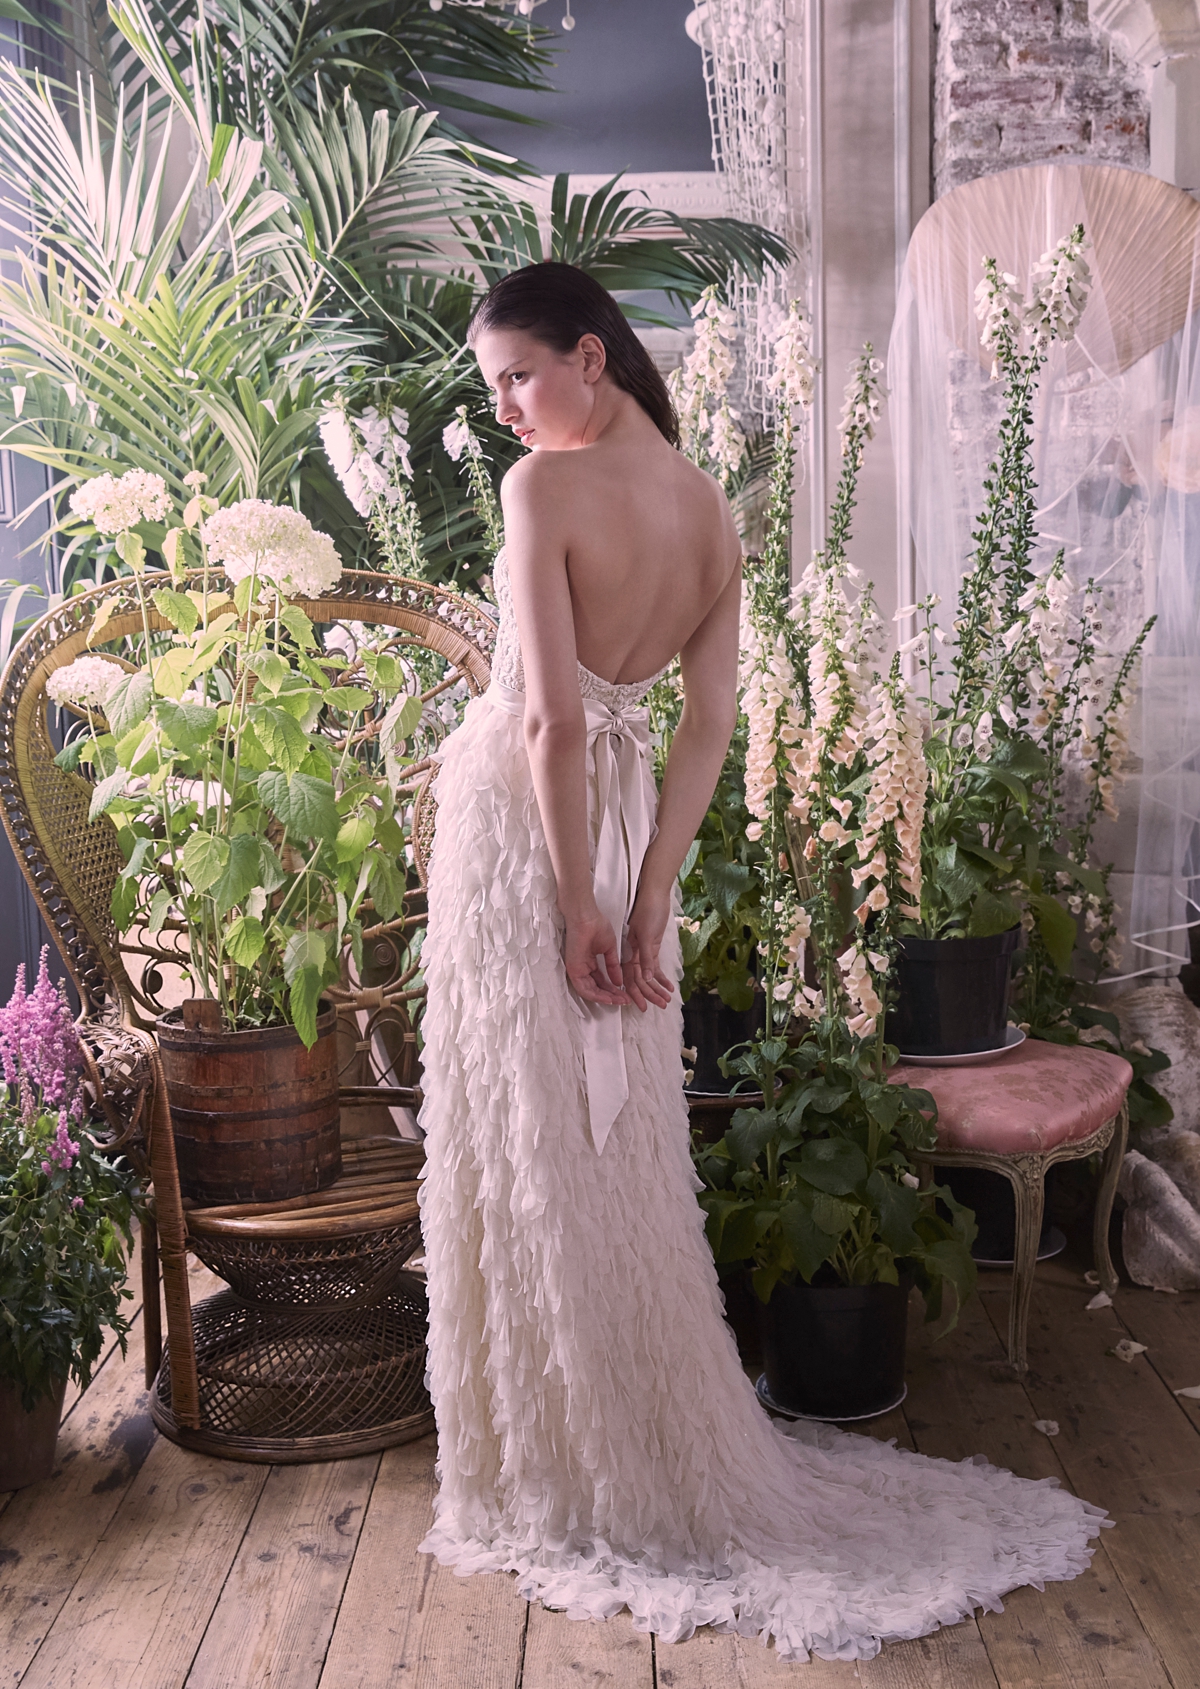 'Wild Love' - the 2017 bridal collection by Halfpenny London